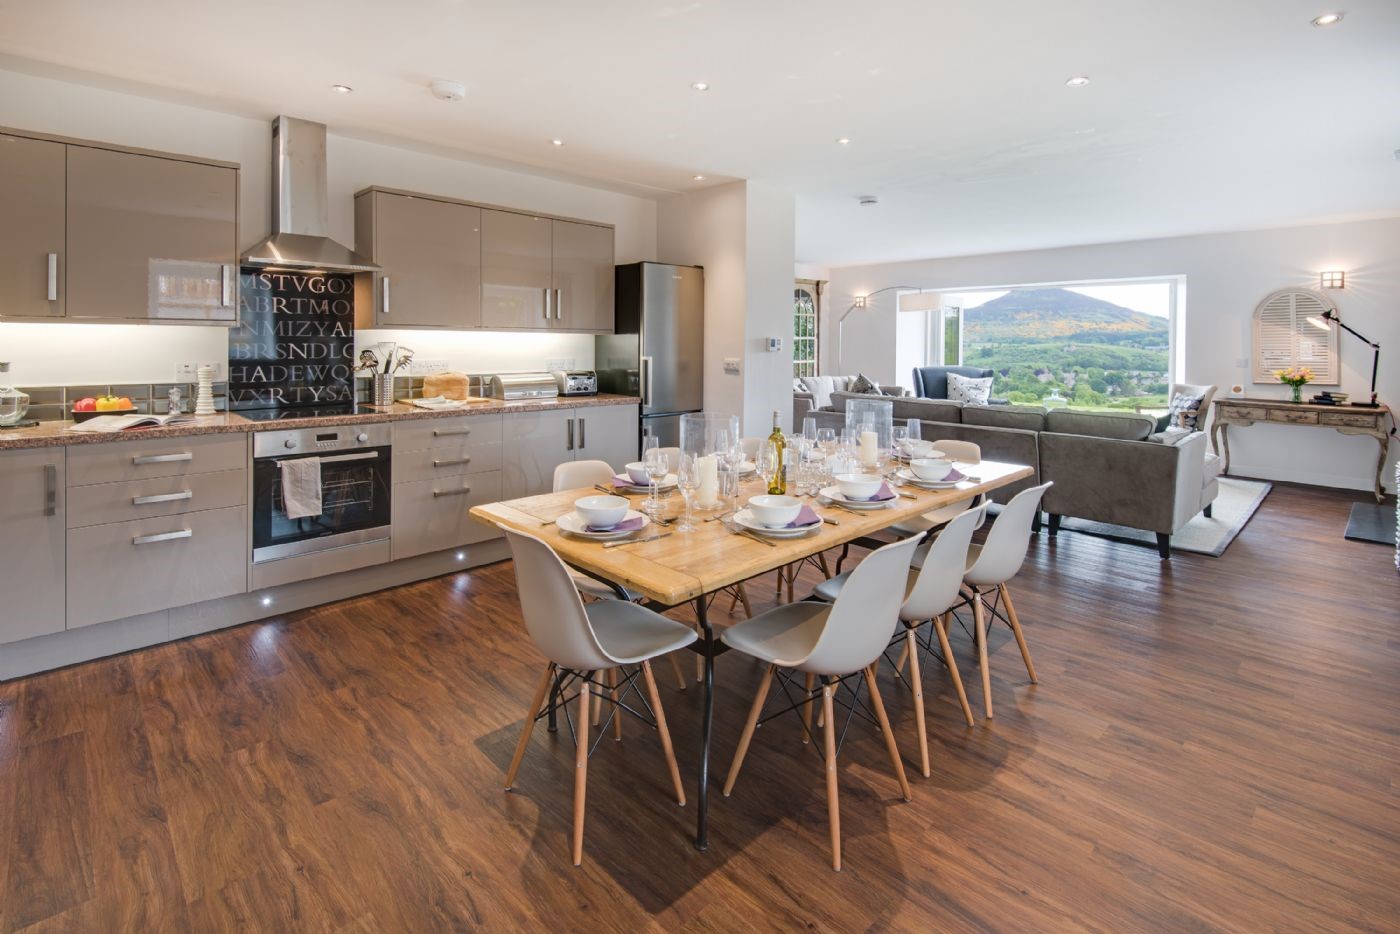 Granary - contemporary kitchen and dining area with seating for eight guests